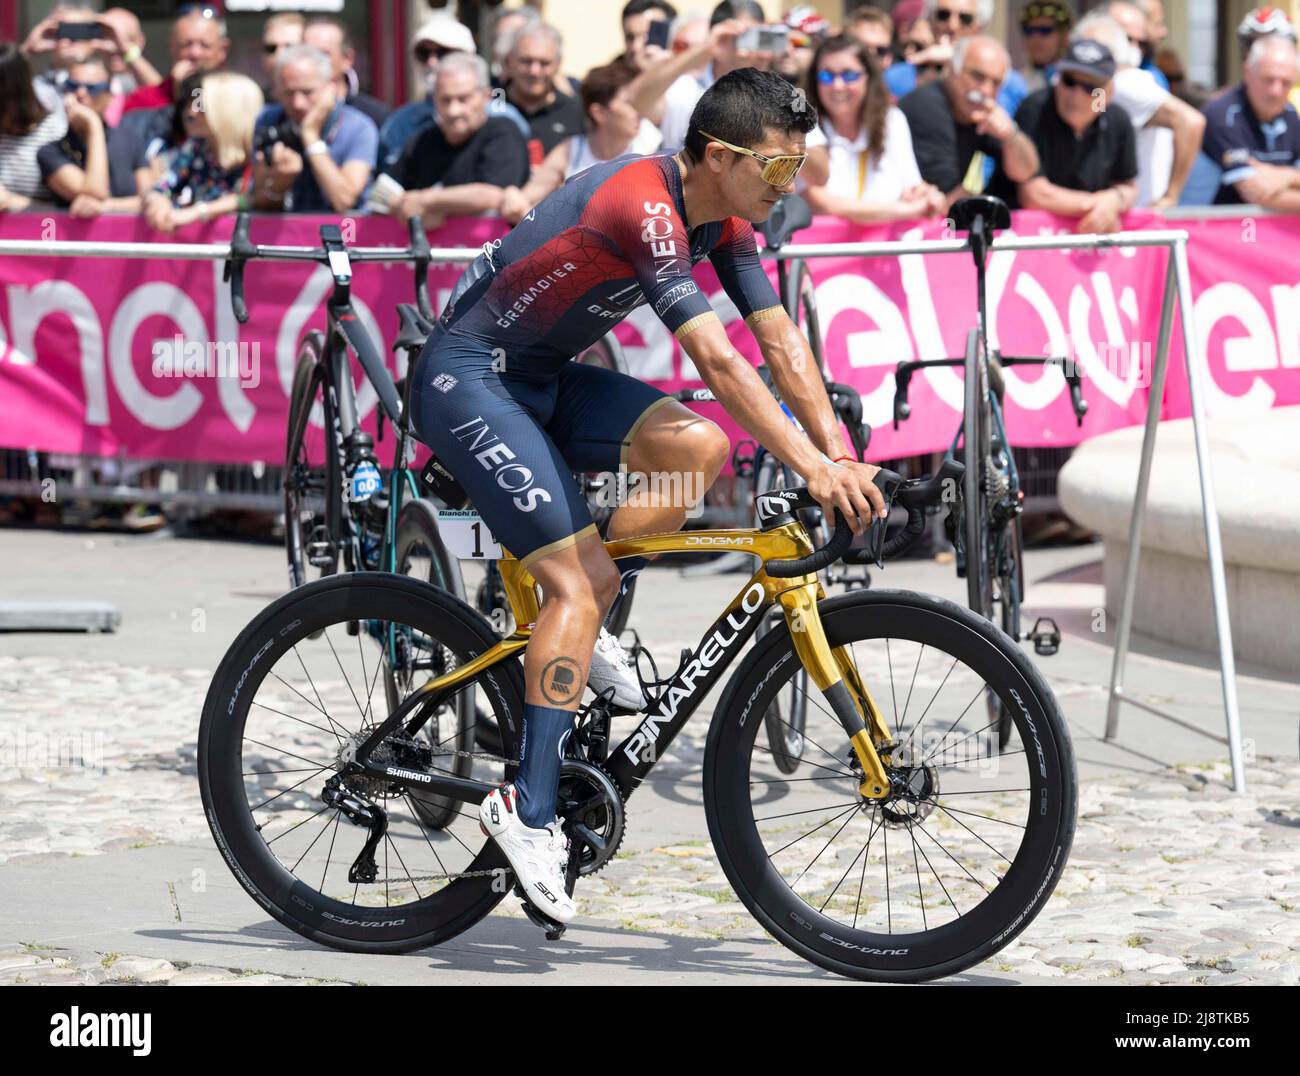 May 18, 2022, REGGIO EMILIA, ITALY: Ecuadorean rider Richard Carapaz of  INEOS- Grenadiers team, at the start of the eleventh stage of the 105th  Giro d'Italia cycling tour, a race of 203